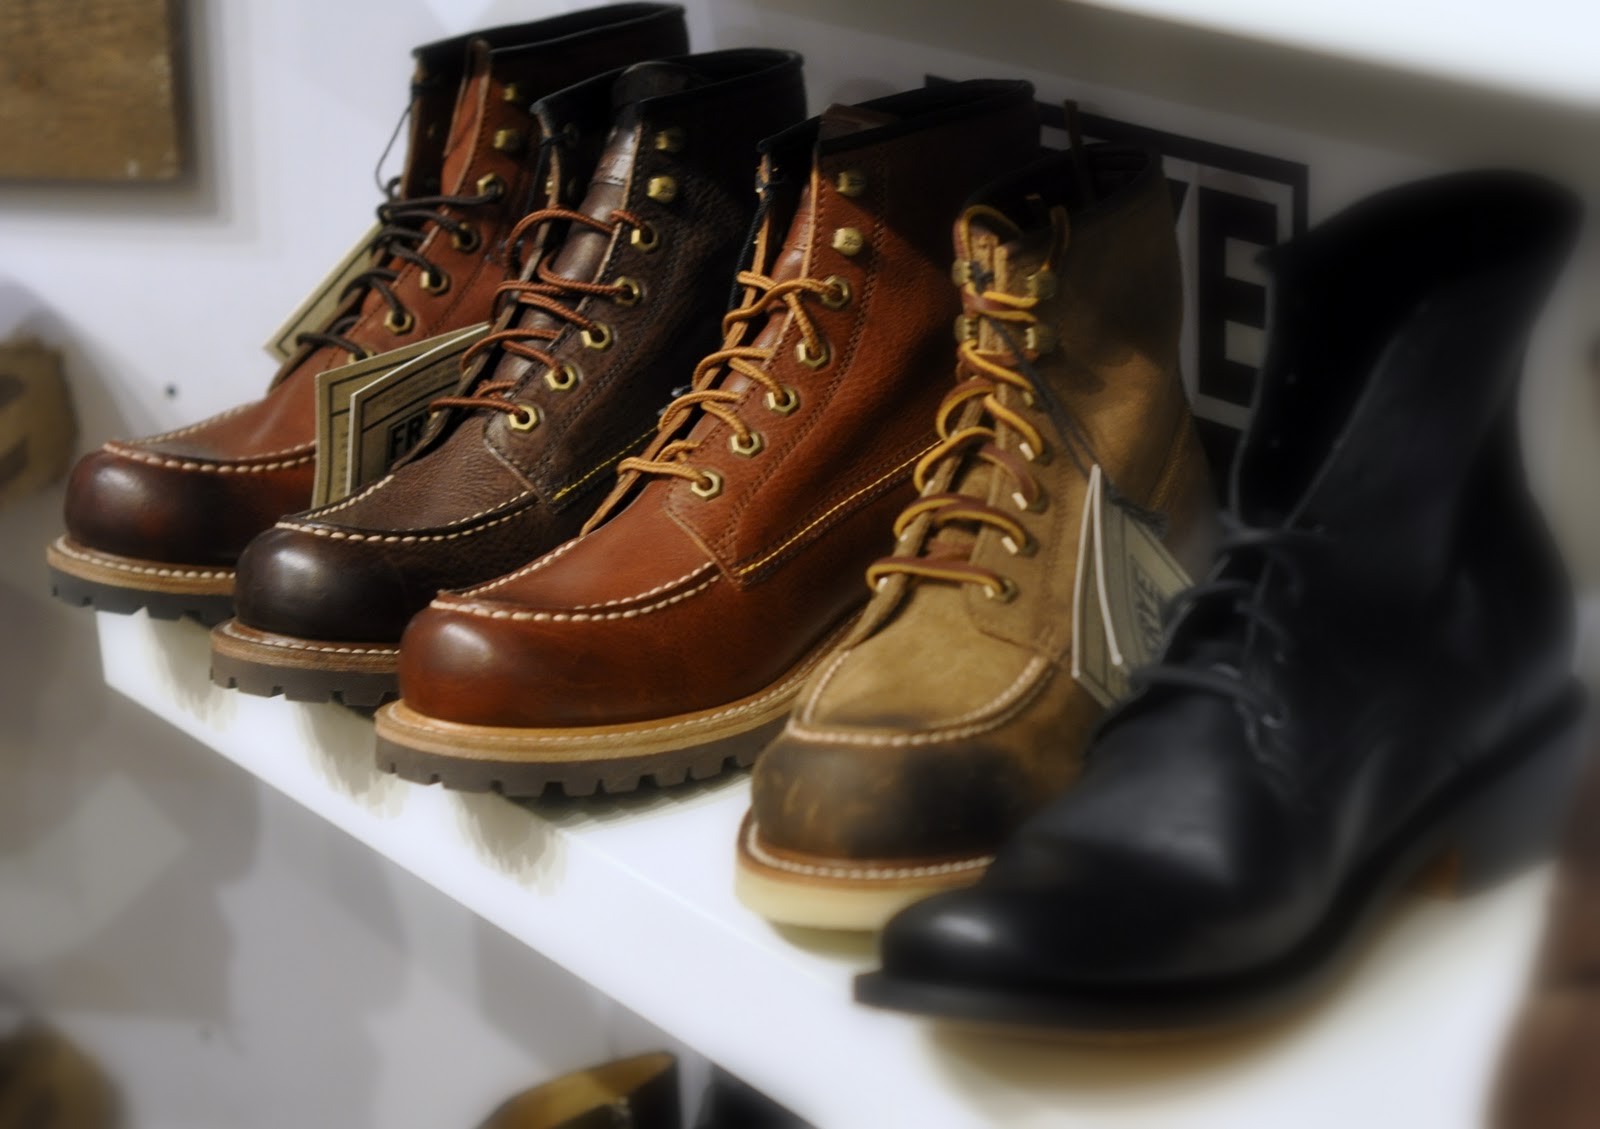 Keystone Business: Boots, Leather and Heritage Brands